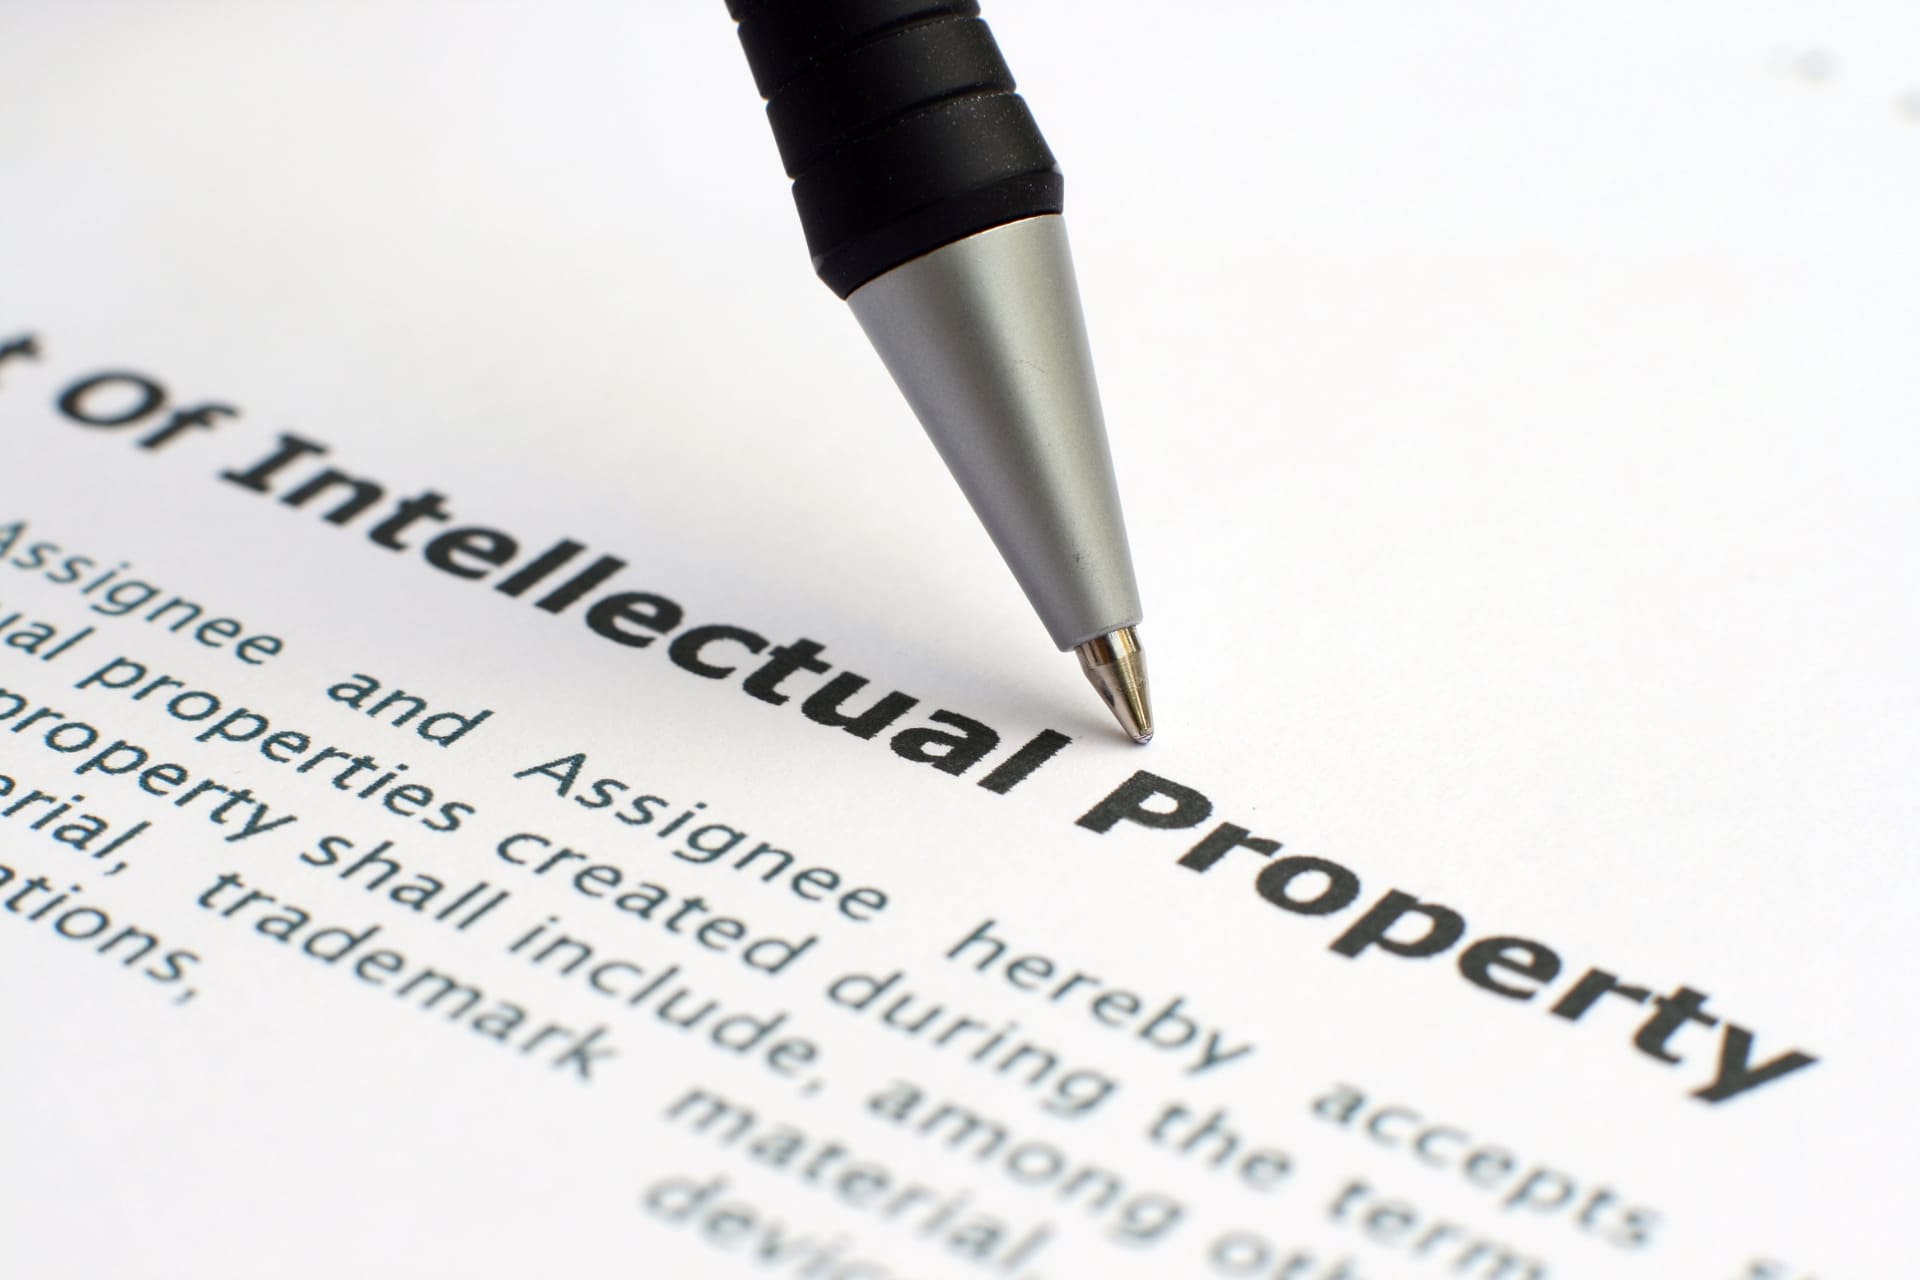 Intellectual Property Protection Strategies